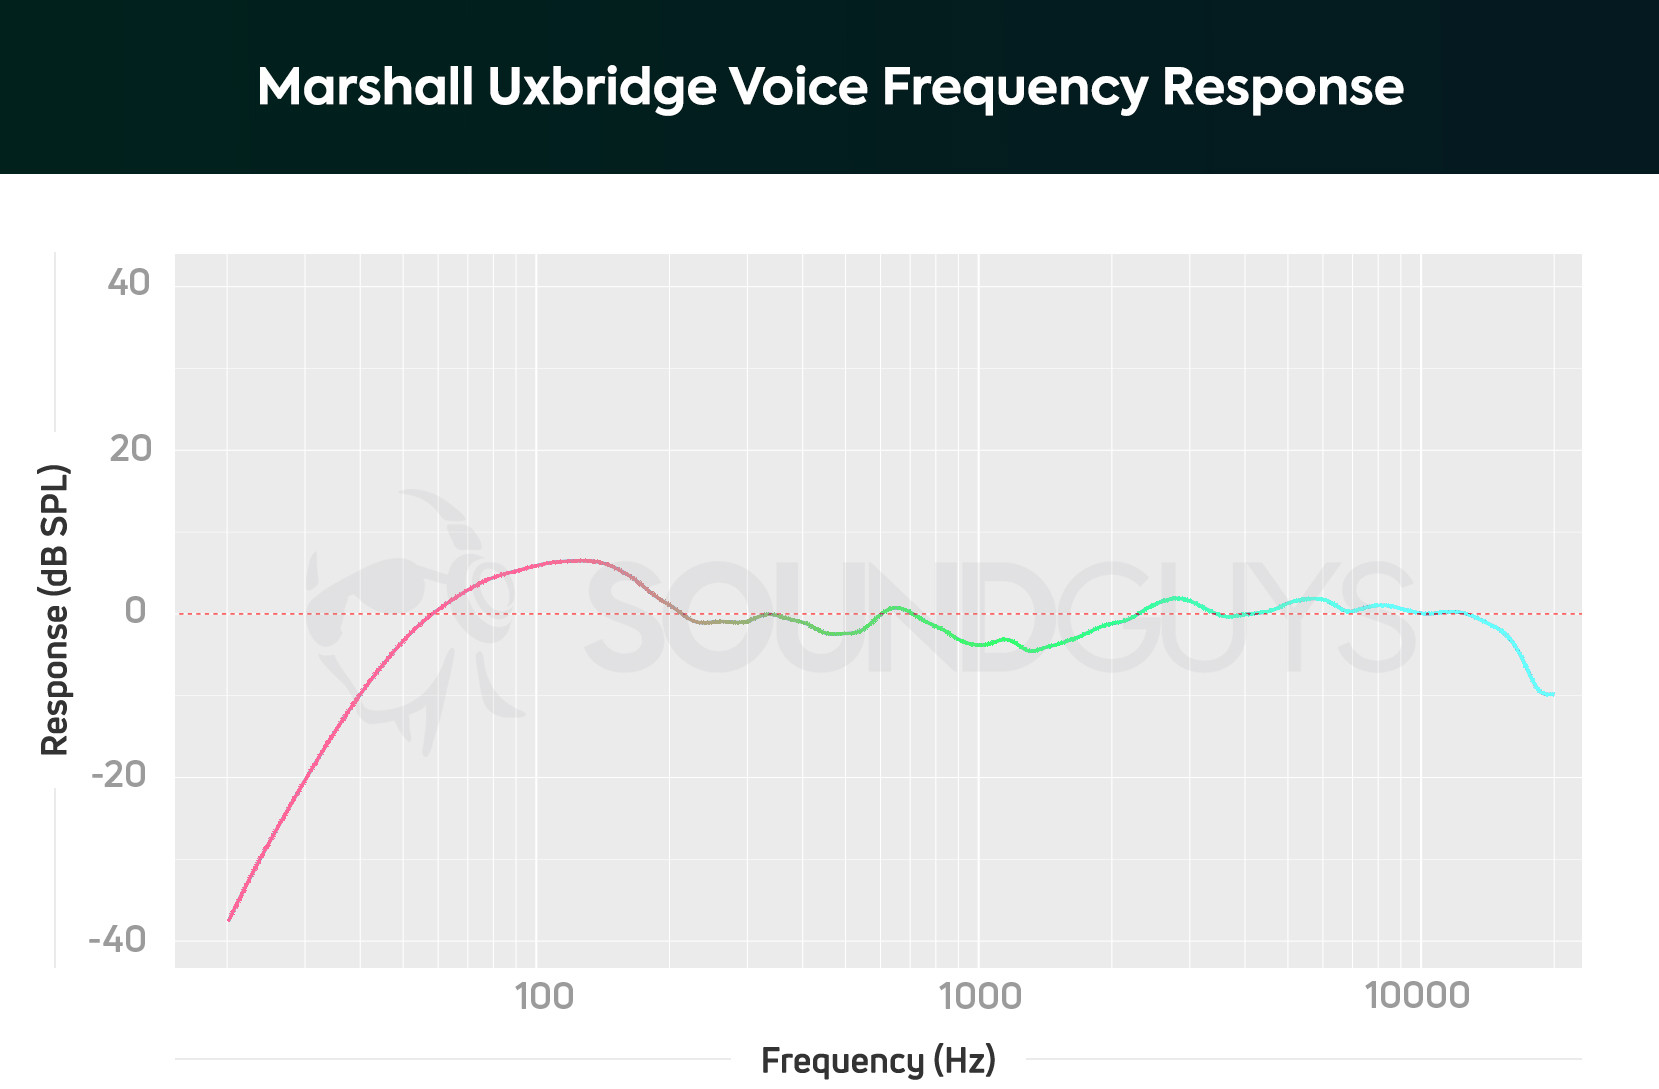 Marshall Uxbridge Voice frequency response with slight emphasis on the low end